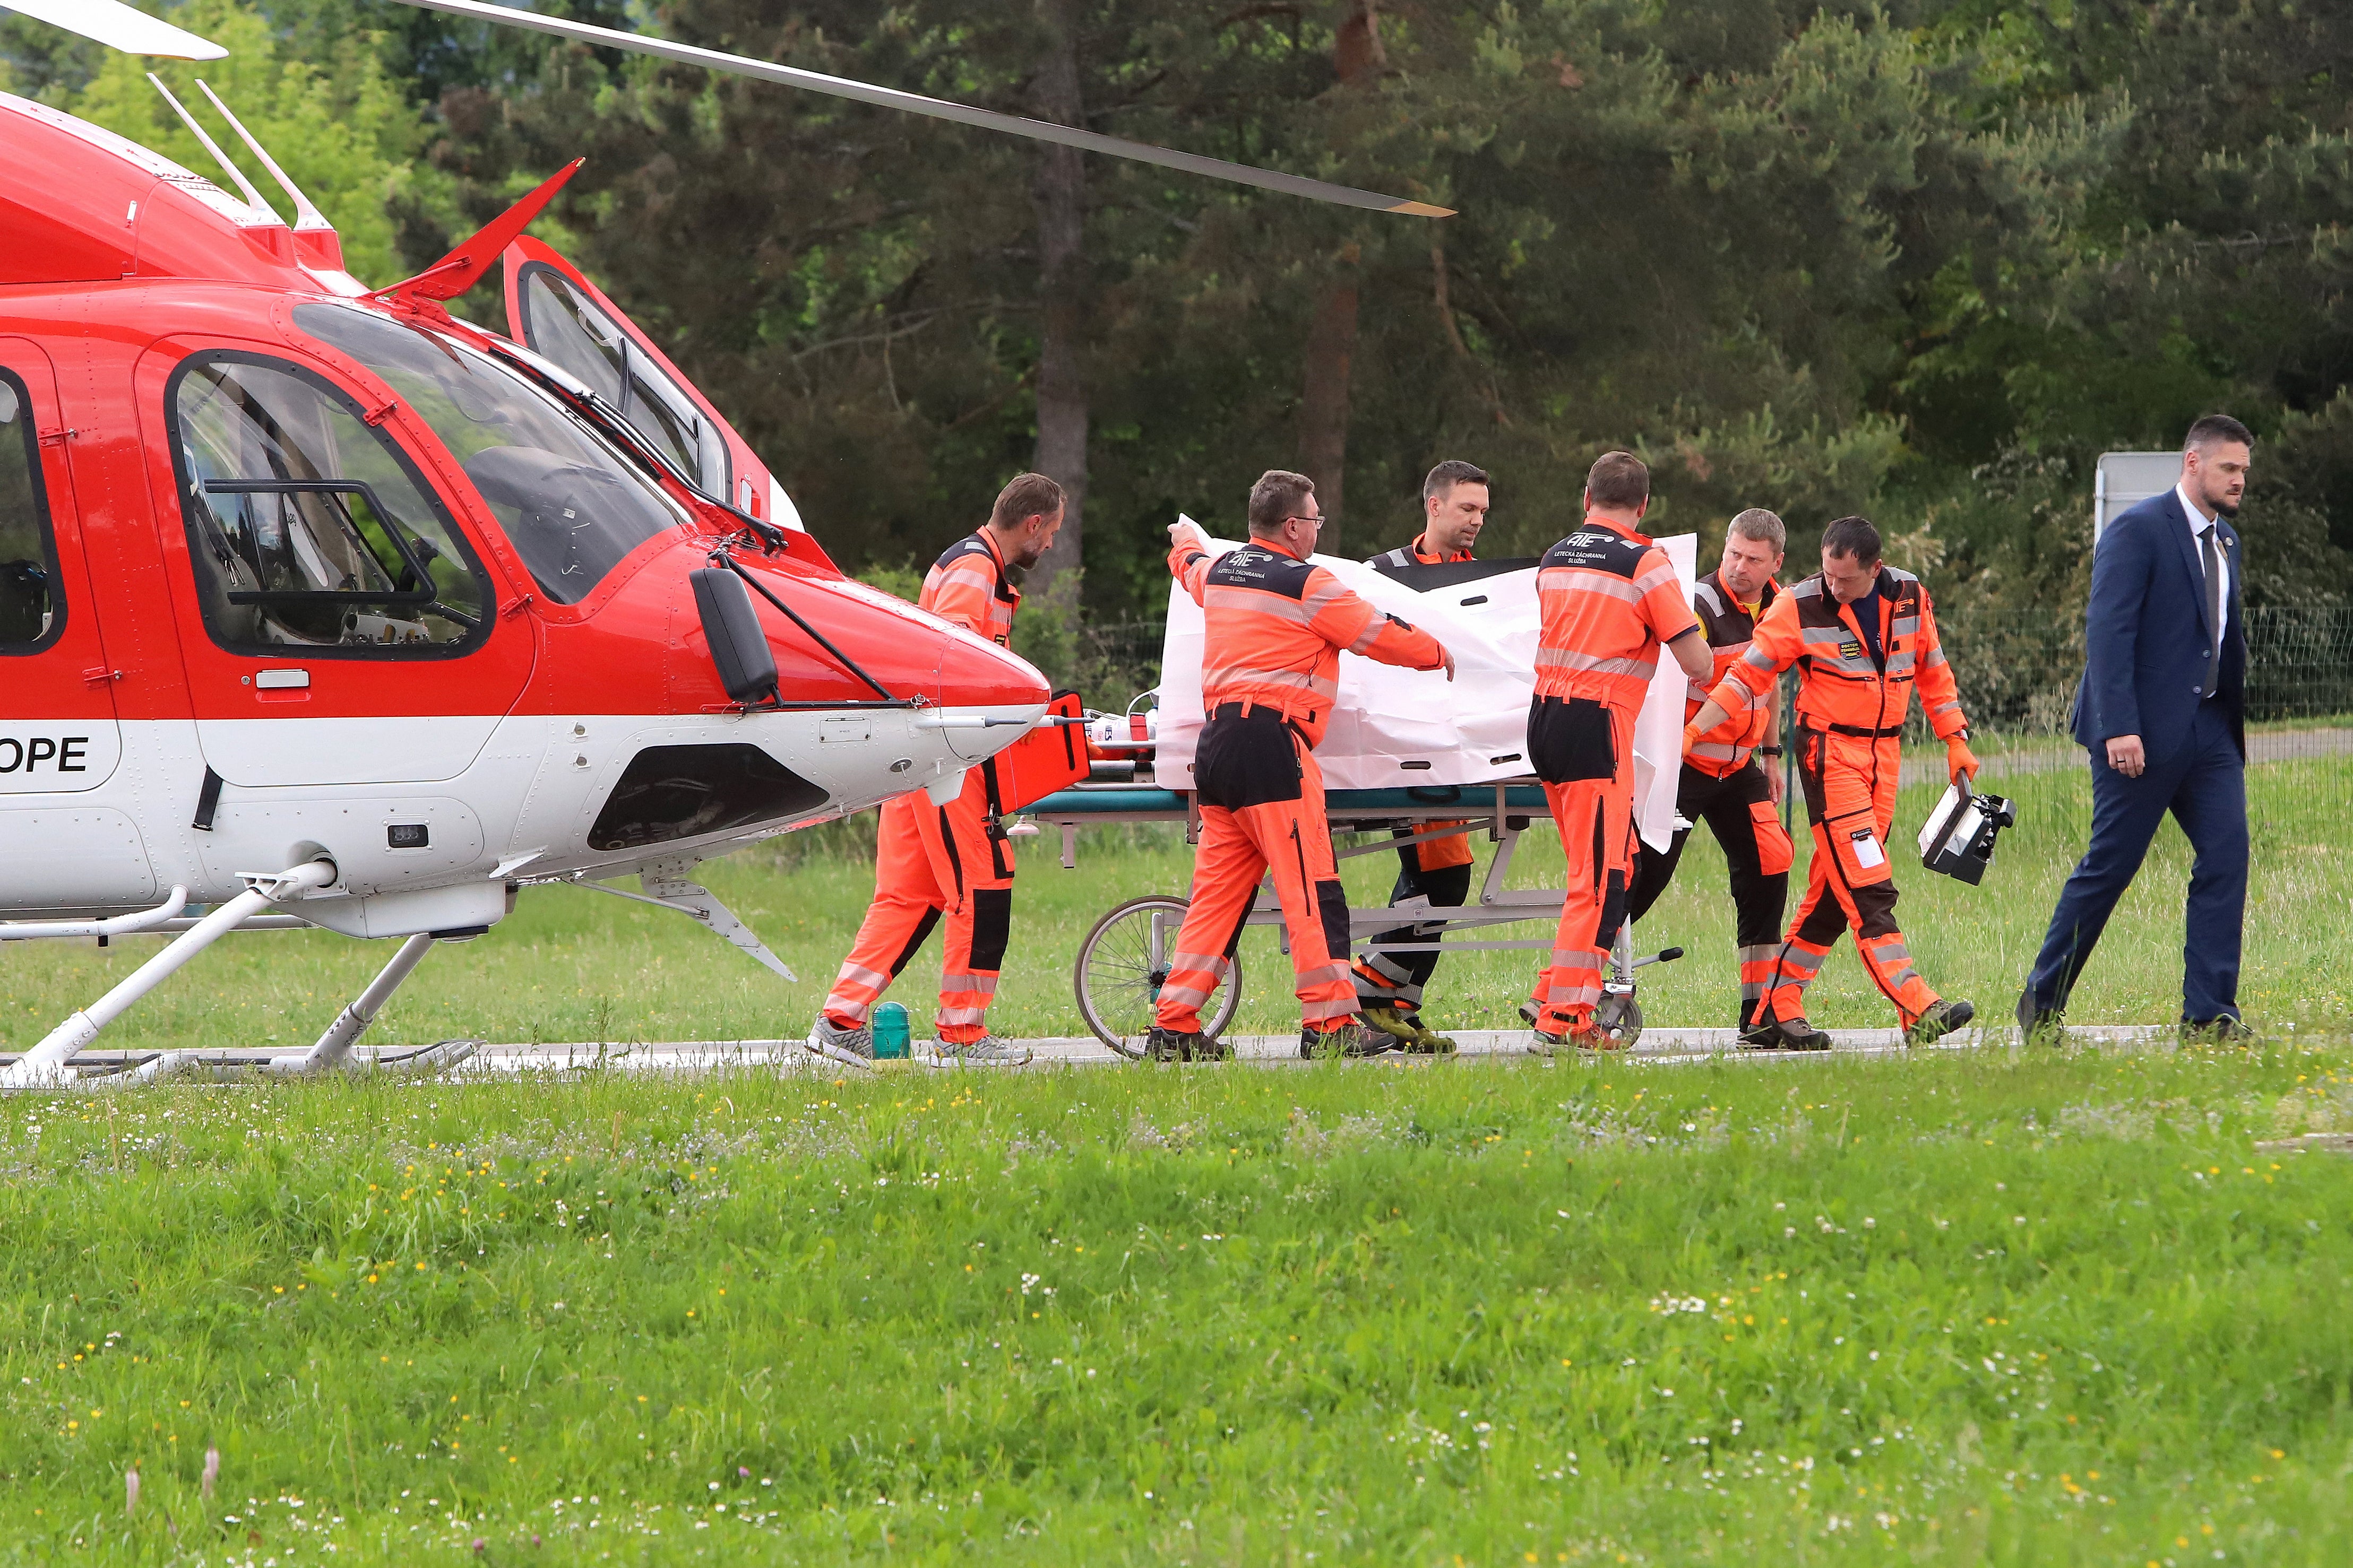 Slovak Prime Minister Robert Fico is rushed to hospital from a helicopter by medics and his security detail in Banska Bystrica, Slovakia